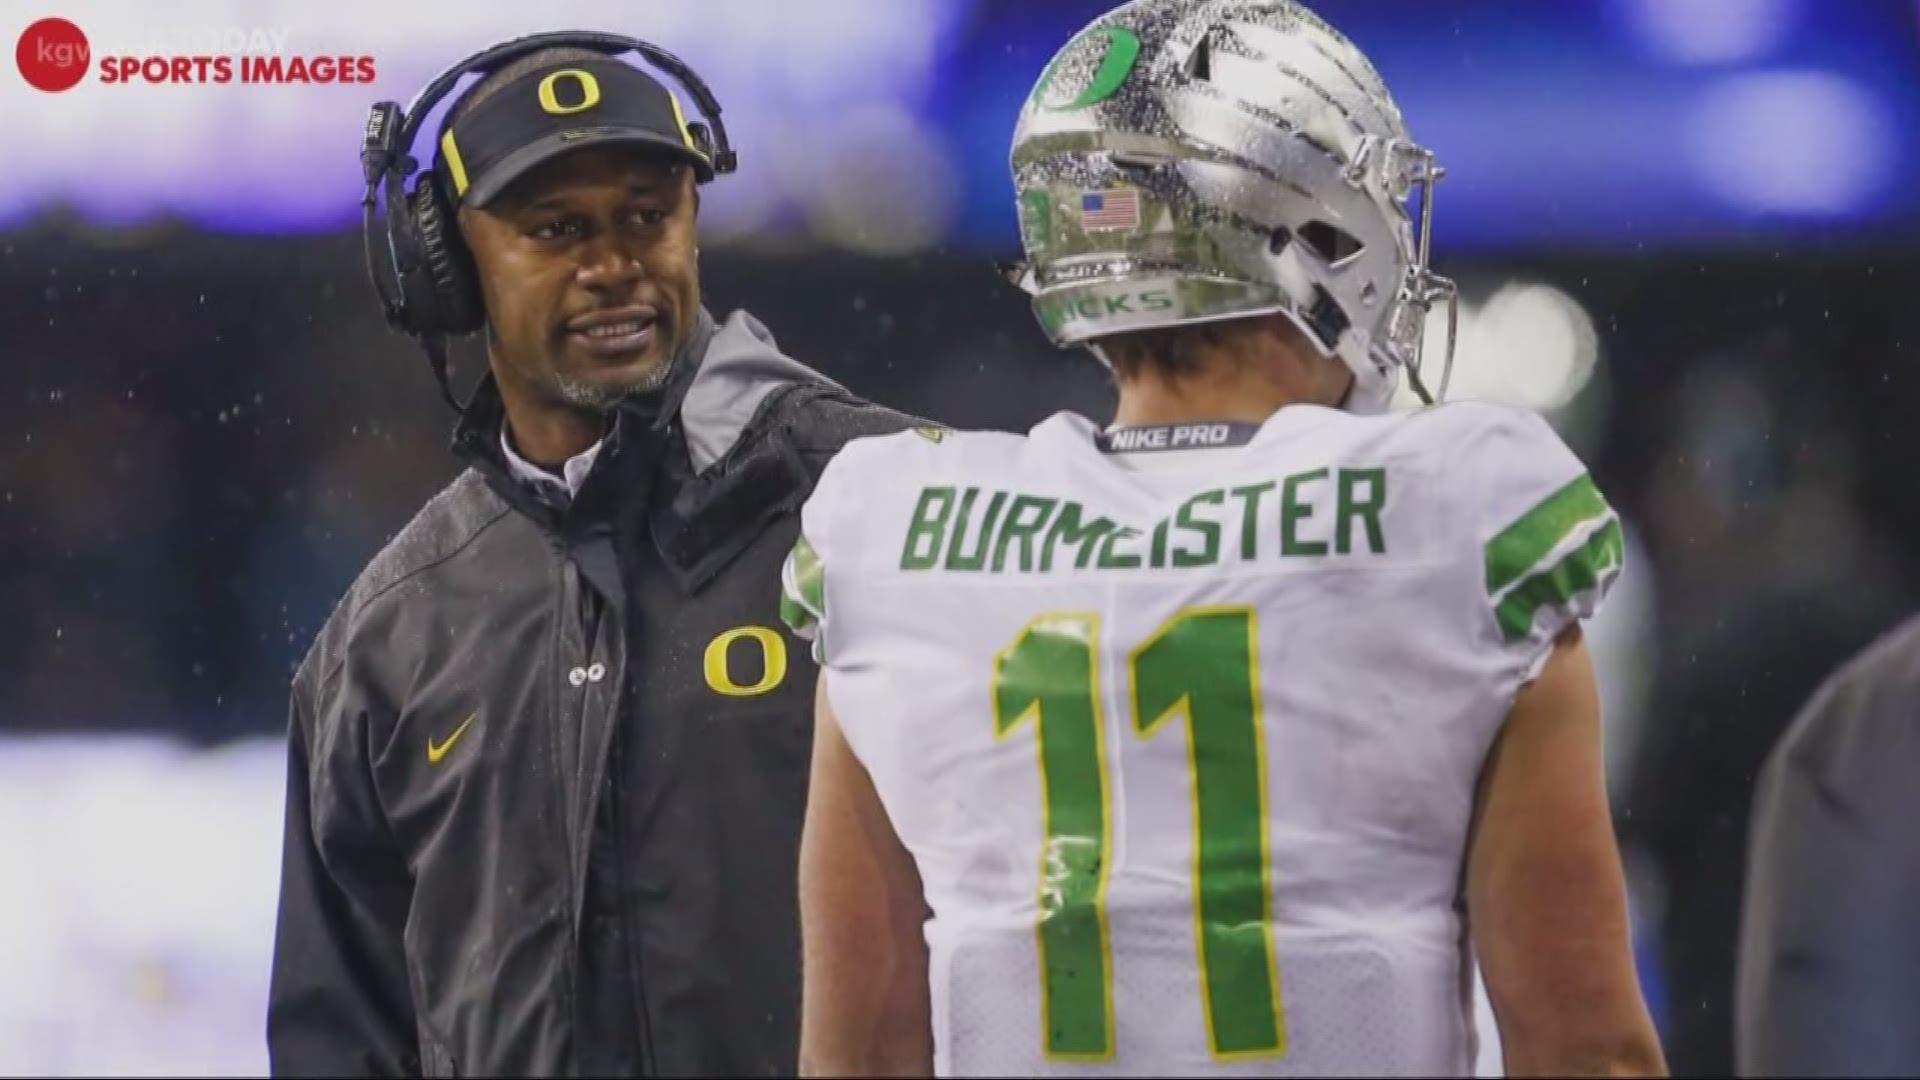 Description: Ducks head coach Willie Taggart accepted the head coaching job at Florida State after only one season in Oregon.